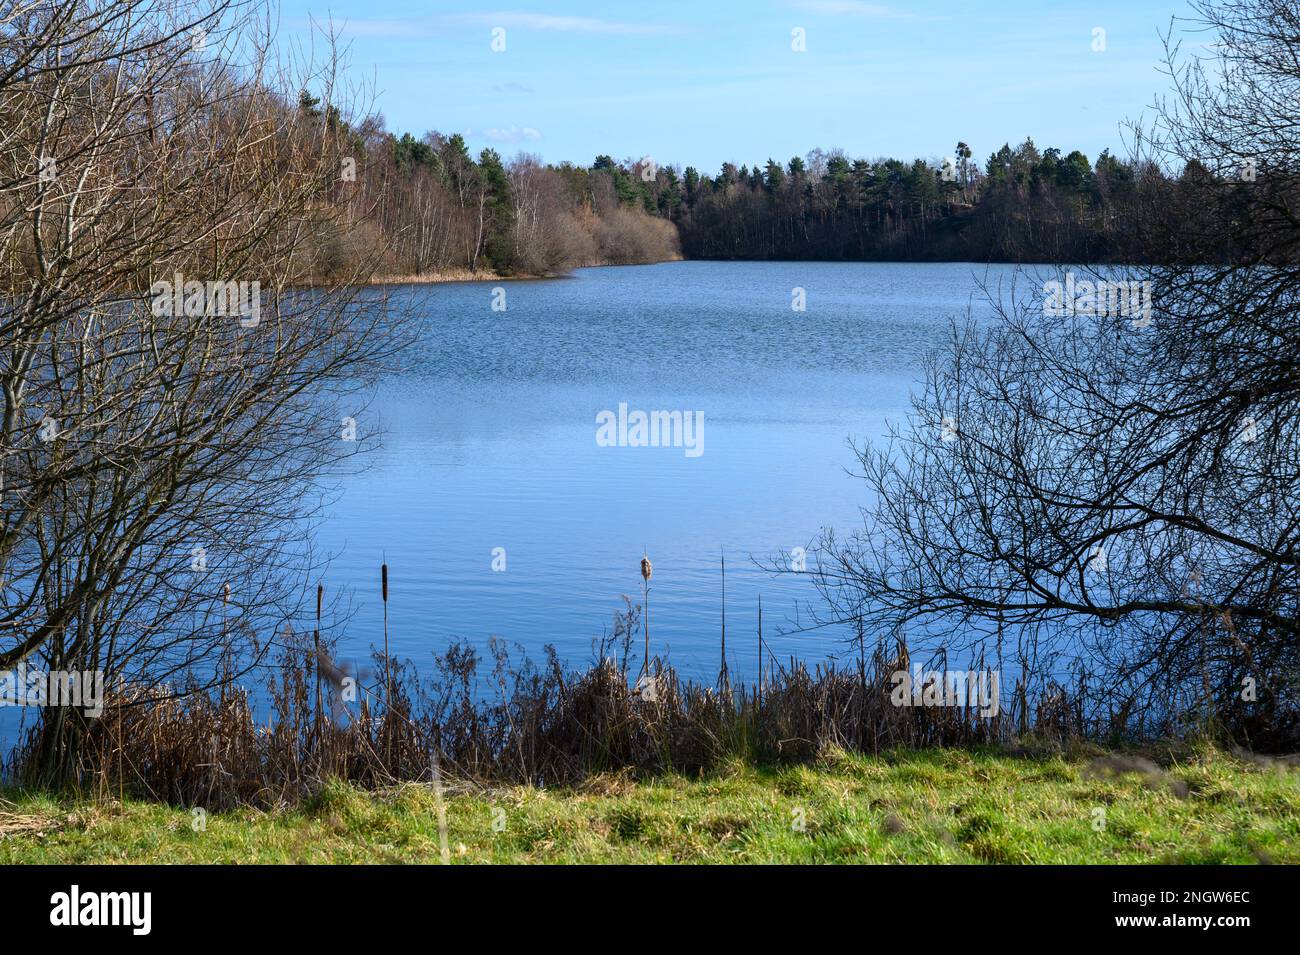 View out over a lake or large pool surrounded by trees in a rural setting under a blue sky. Stock Photo